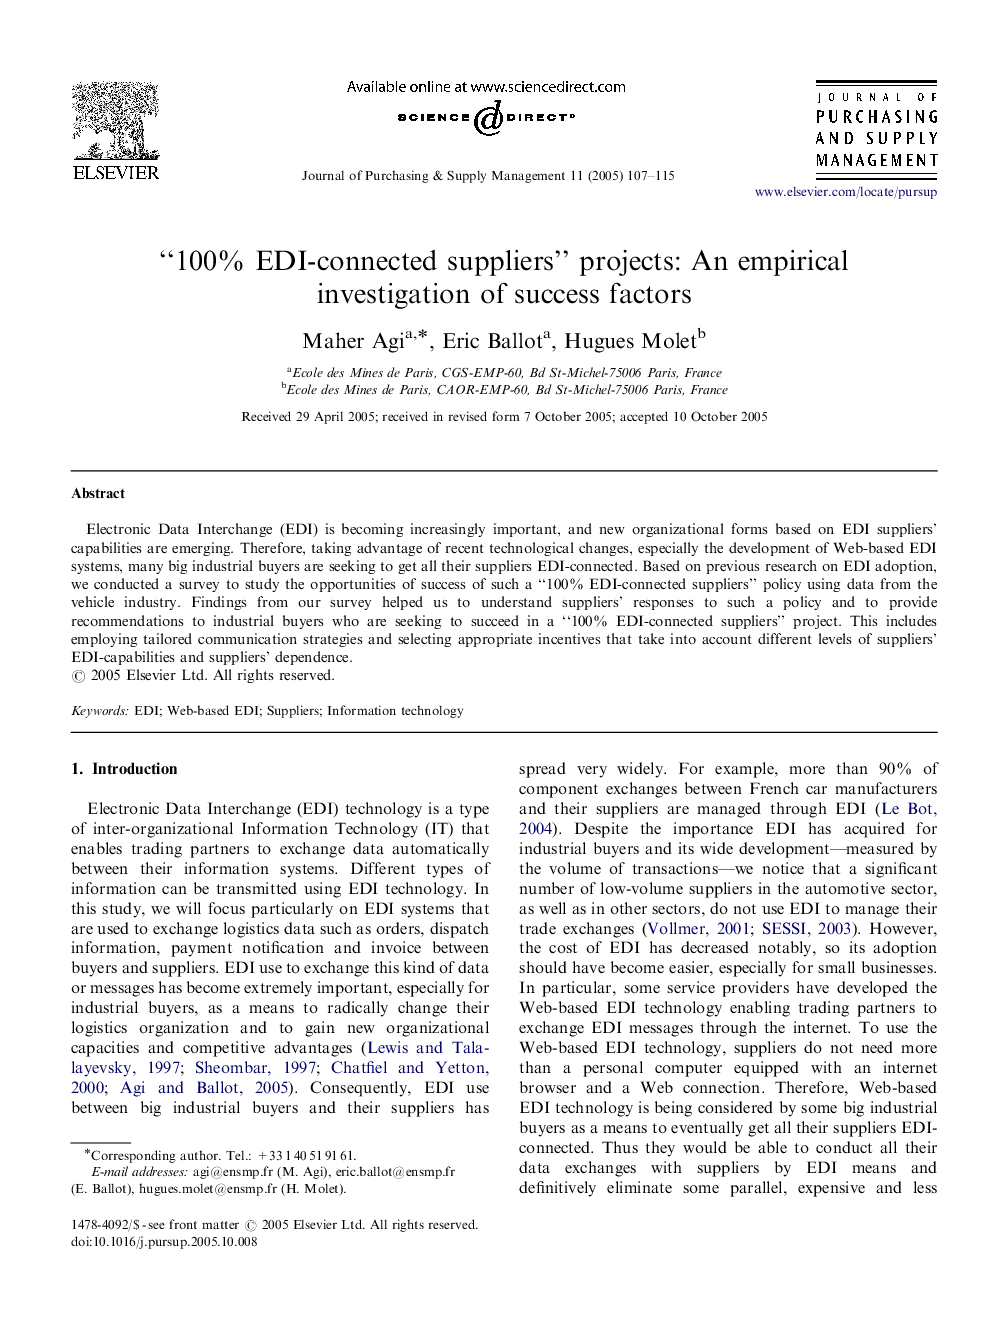 “100% EDI-connected suppliers” projects: An empirical investigation of success factors